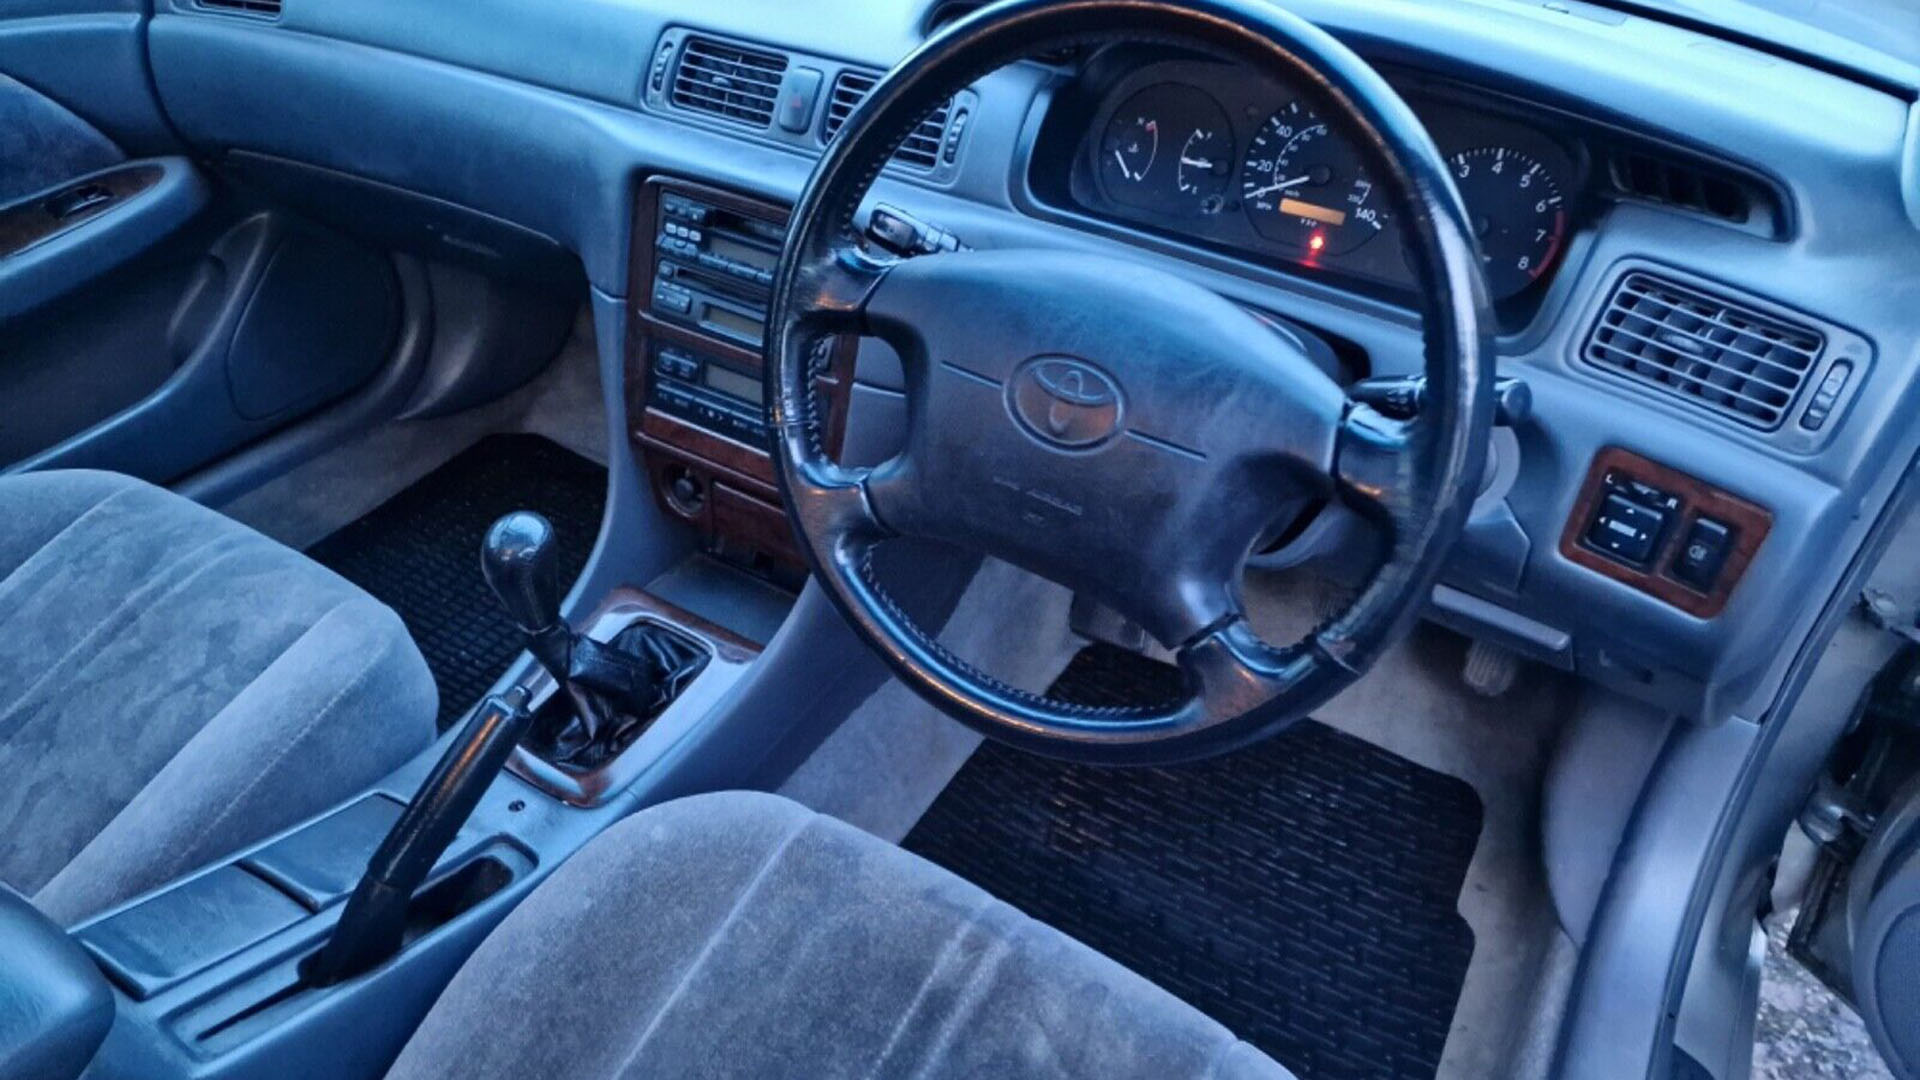 1996 Toyota Camry manual gearbox